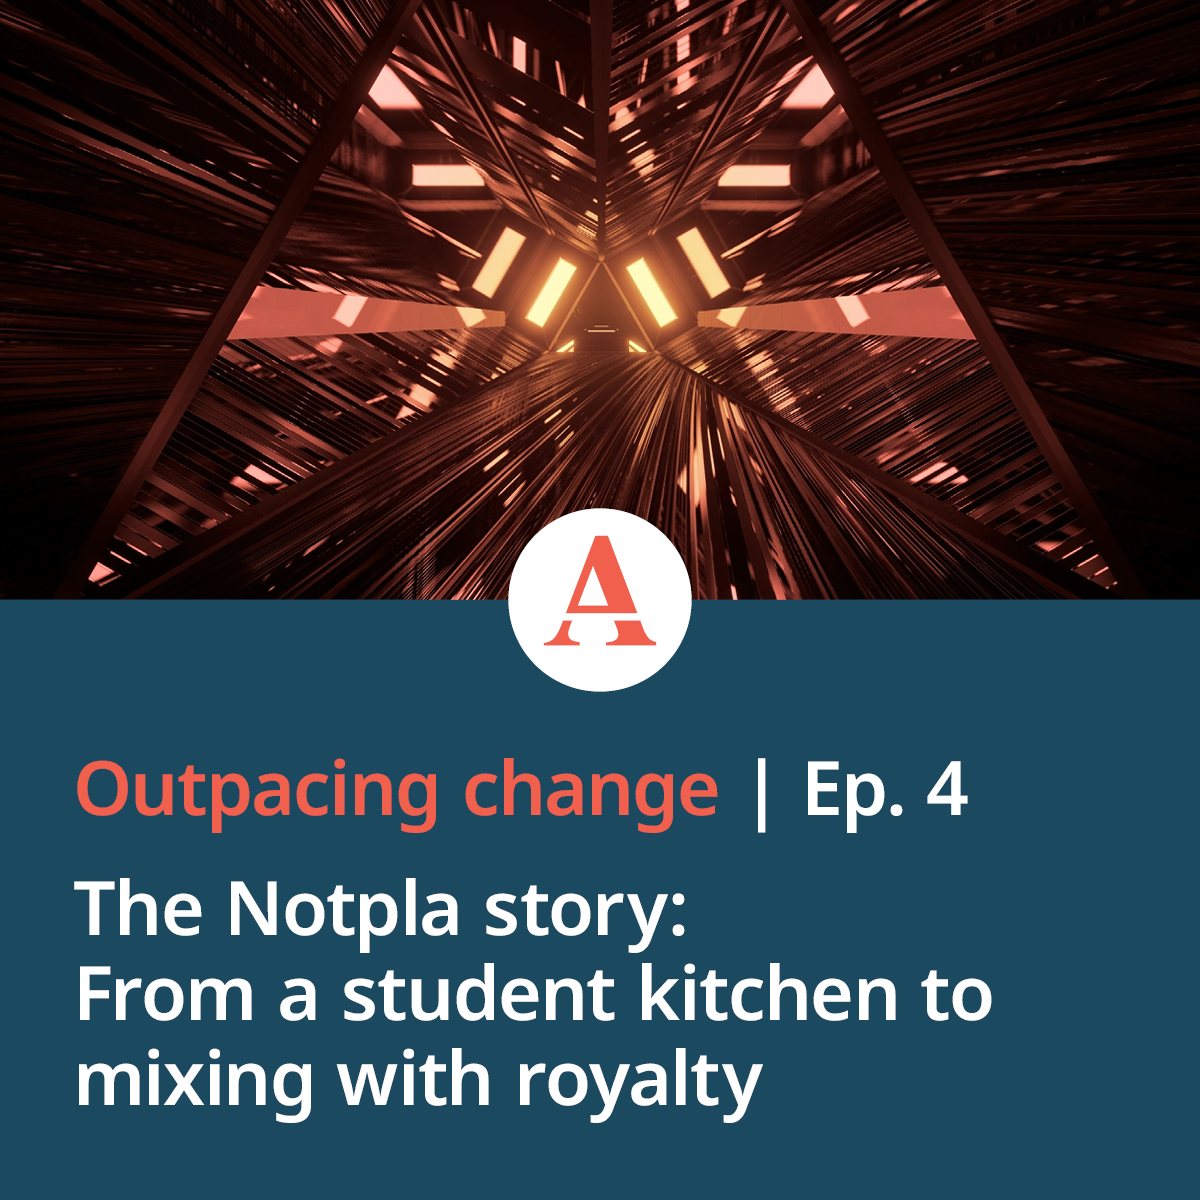 The Notpla story: From a student kitchen to mixing with royalty